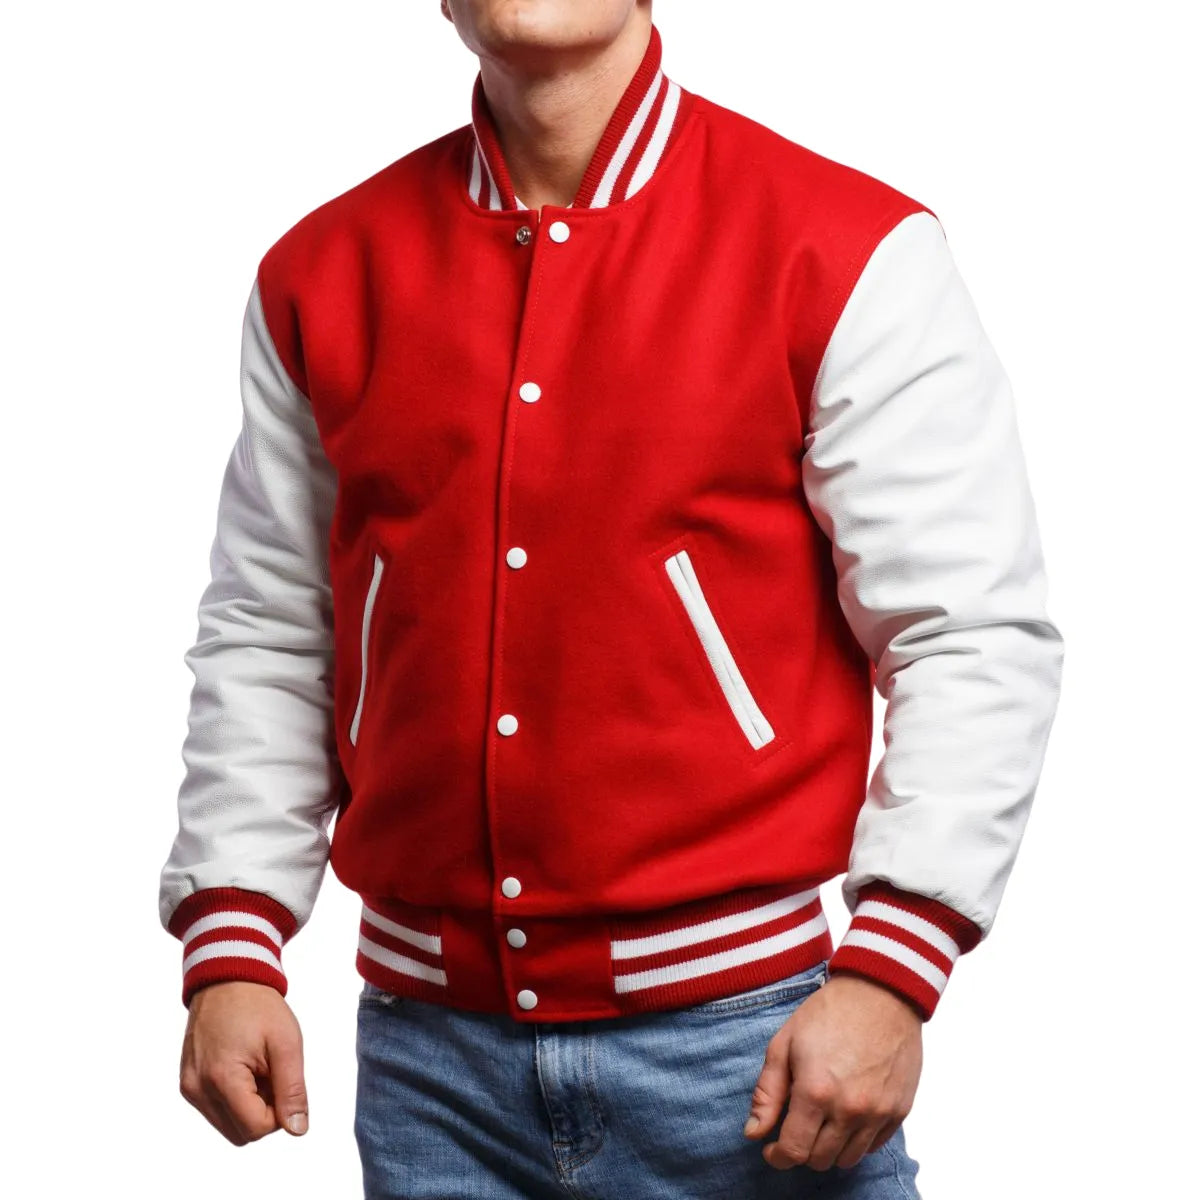 Mens-Red-And-White-Leather-Varsity-Jacket-Model